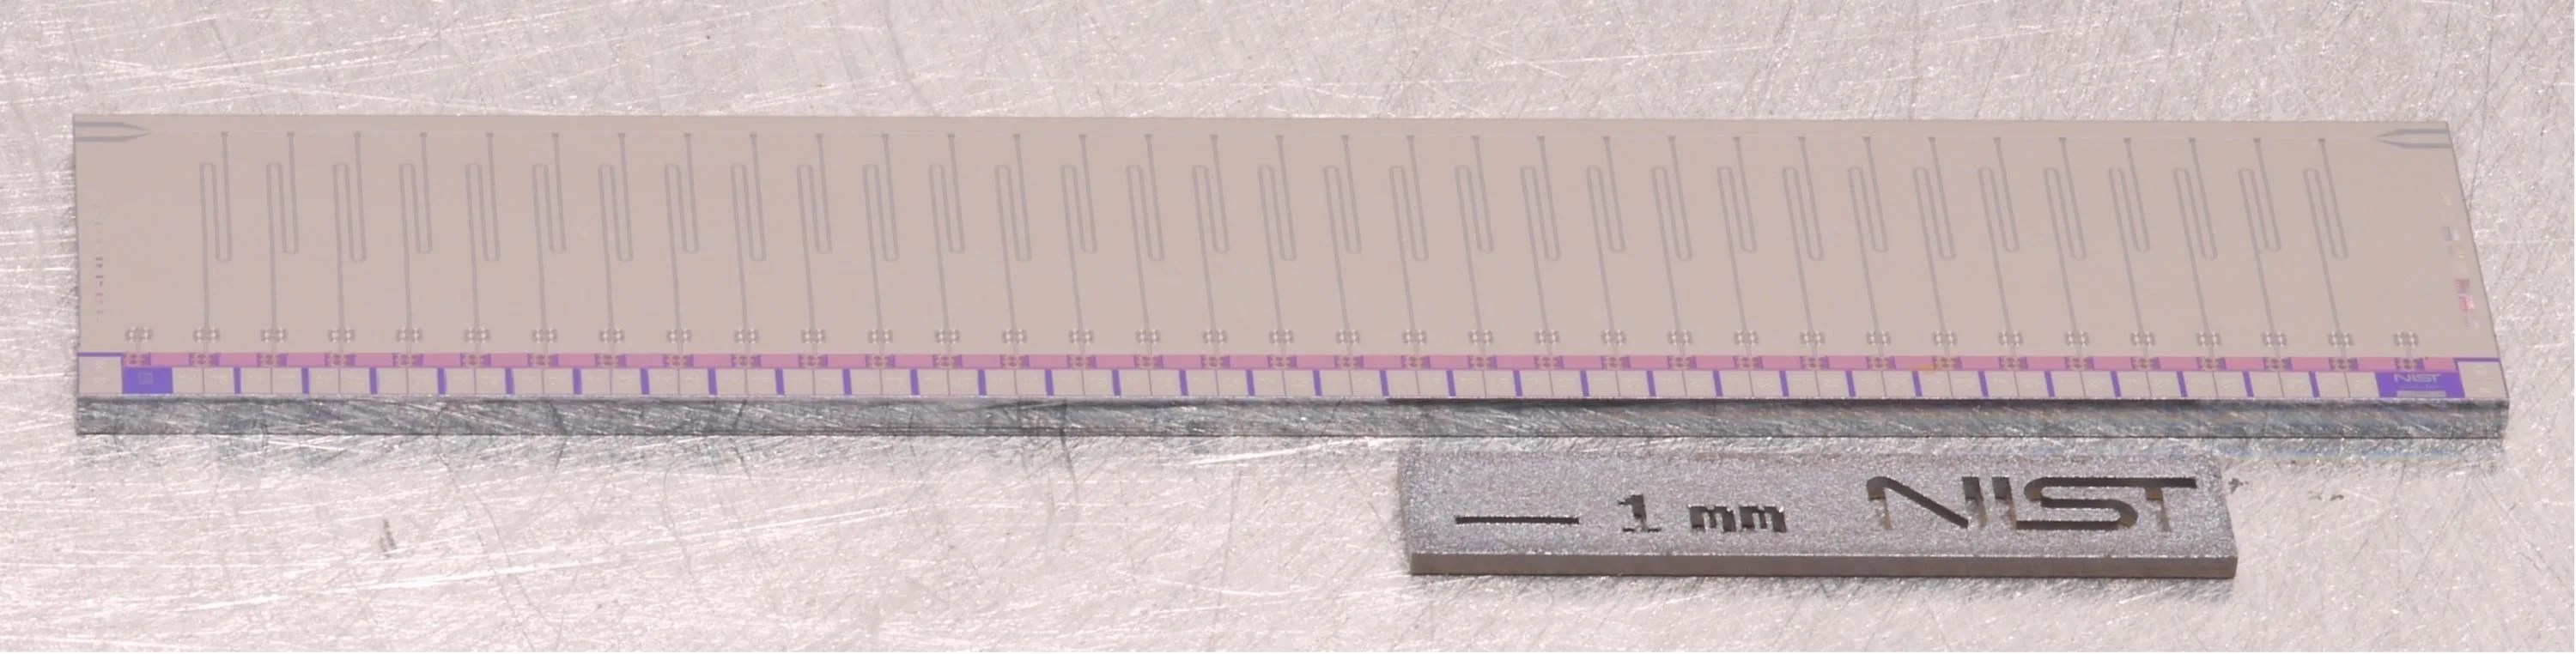 A photograph of a multiplexer chip that is a small, long rectangular object